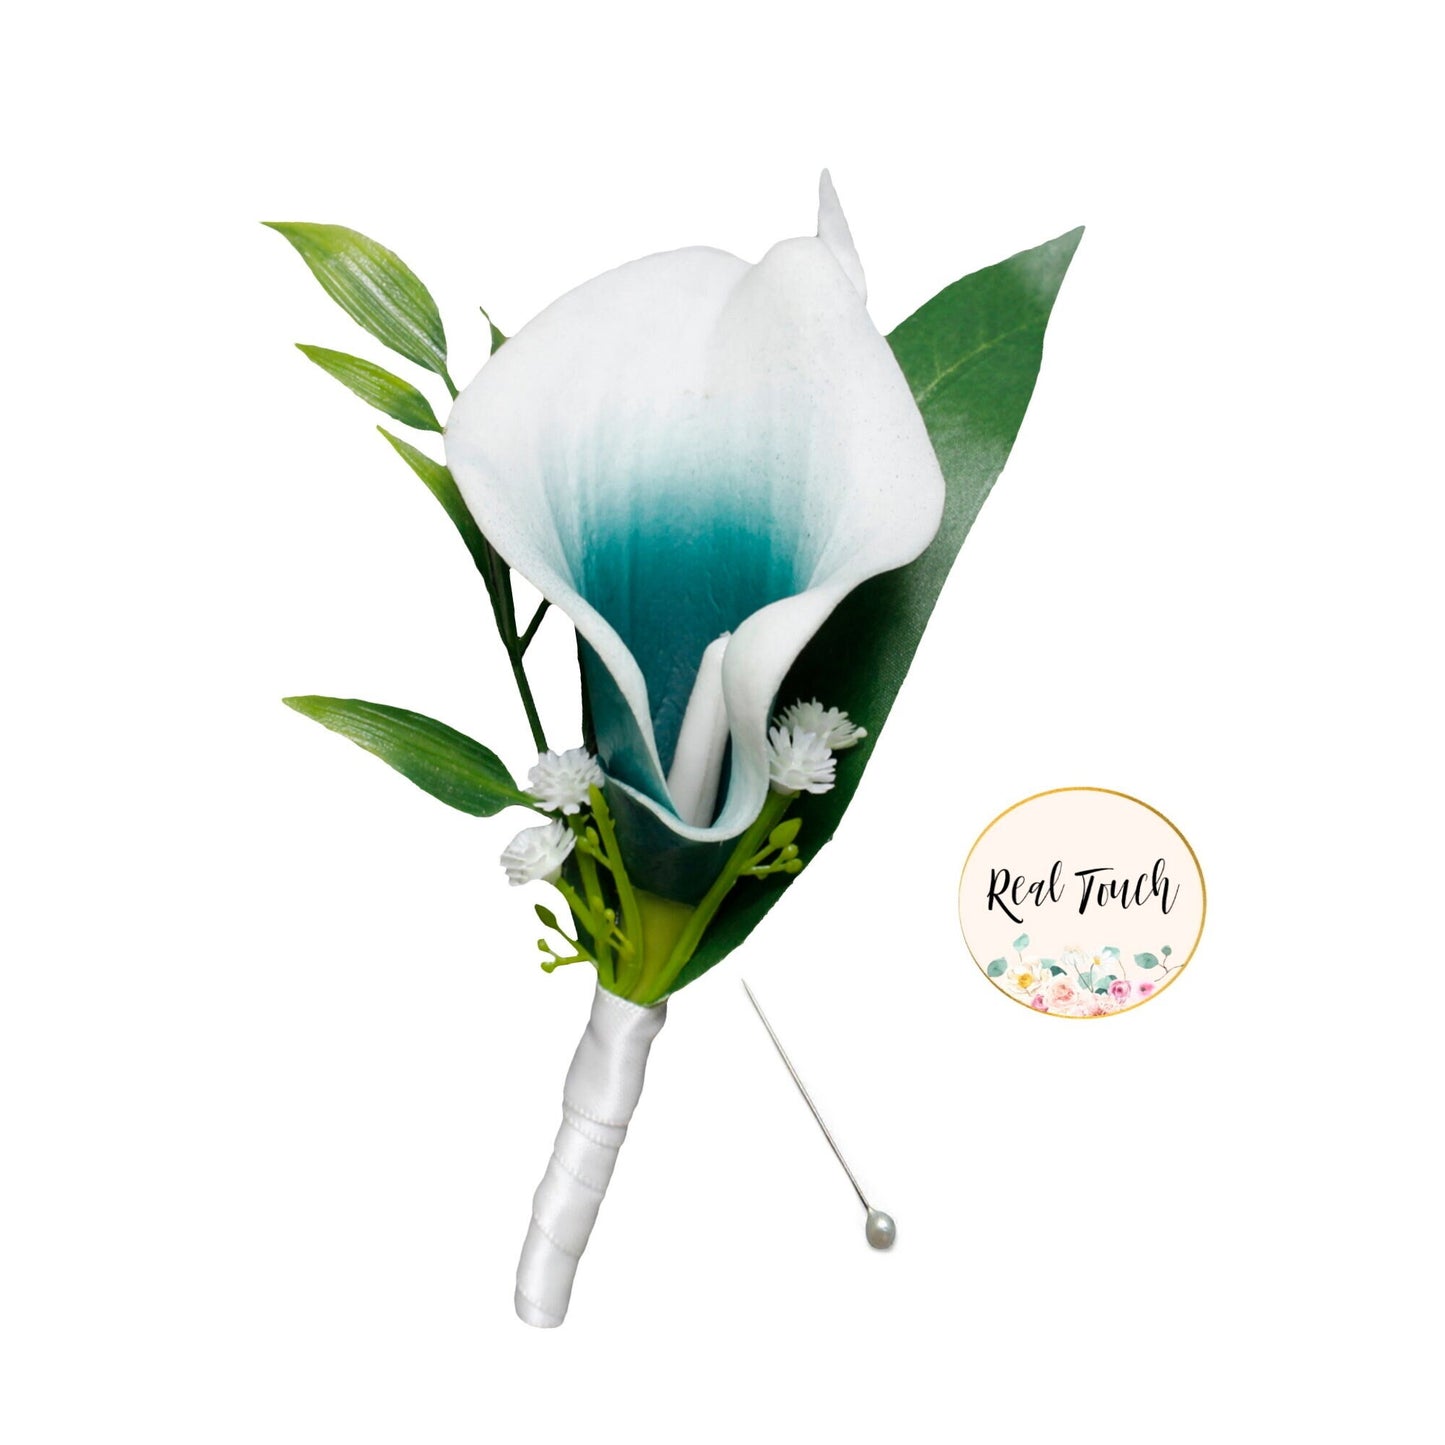 Teal Calla Lily Boutonniere with Elegant Pearl Pin - Timeless Accessory for All Occasions